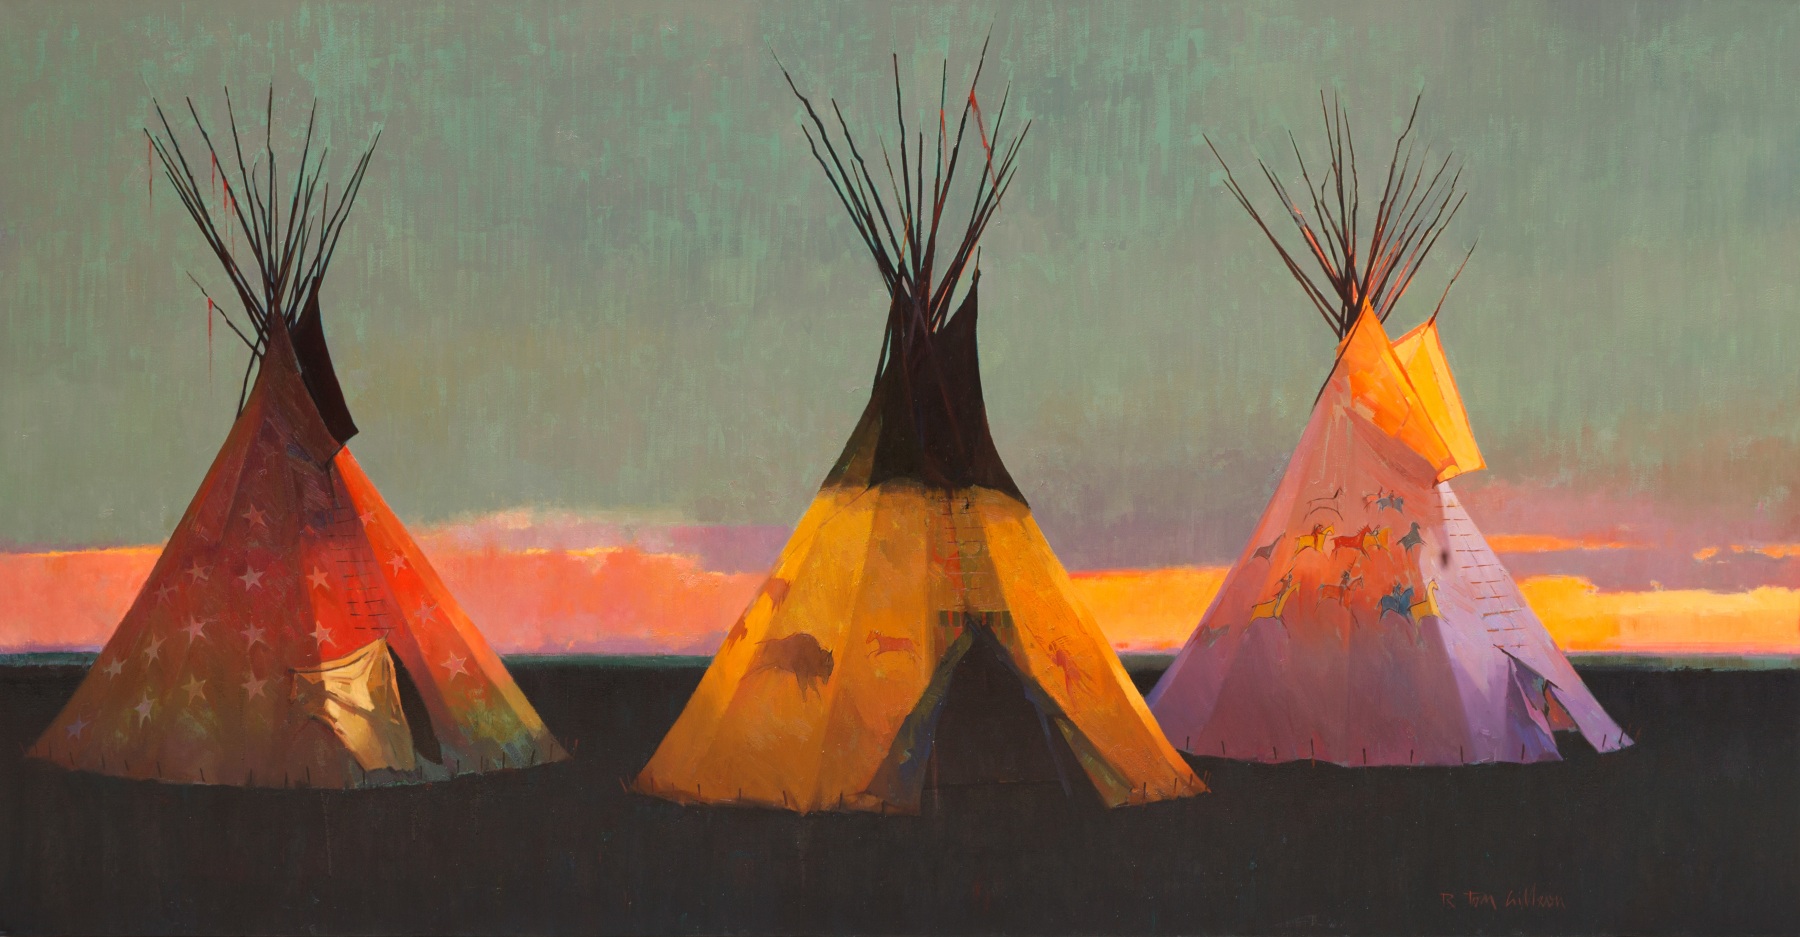 Native Trilogy
Oil on canvas
56 x 90 inches

&amp;nbsp;